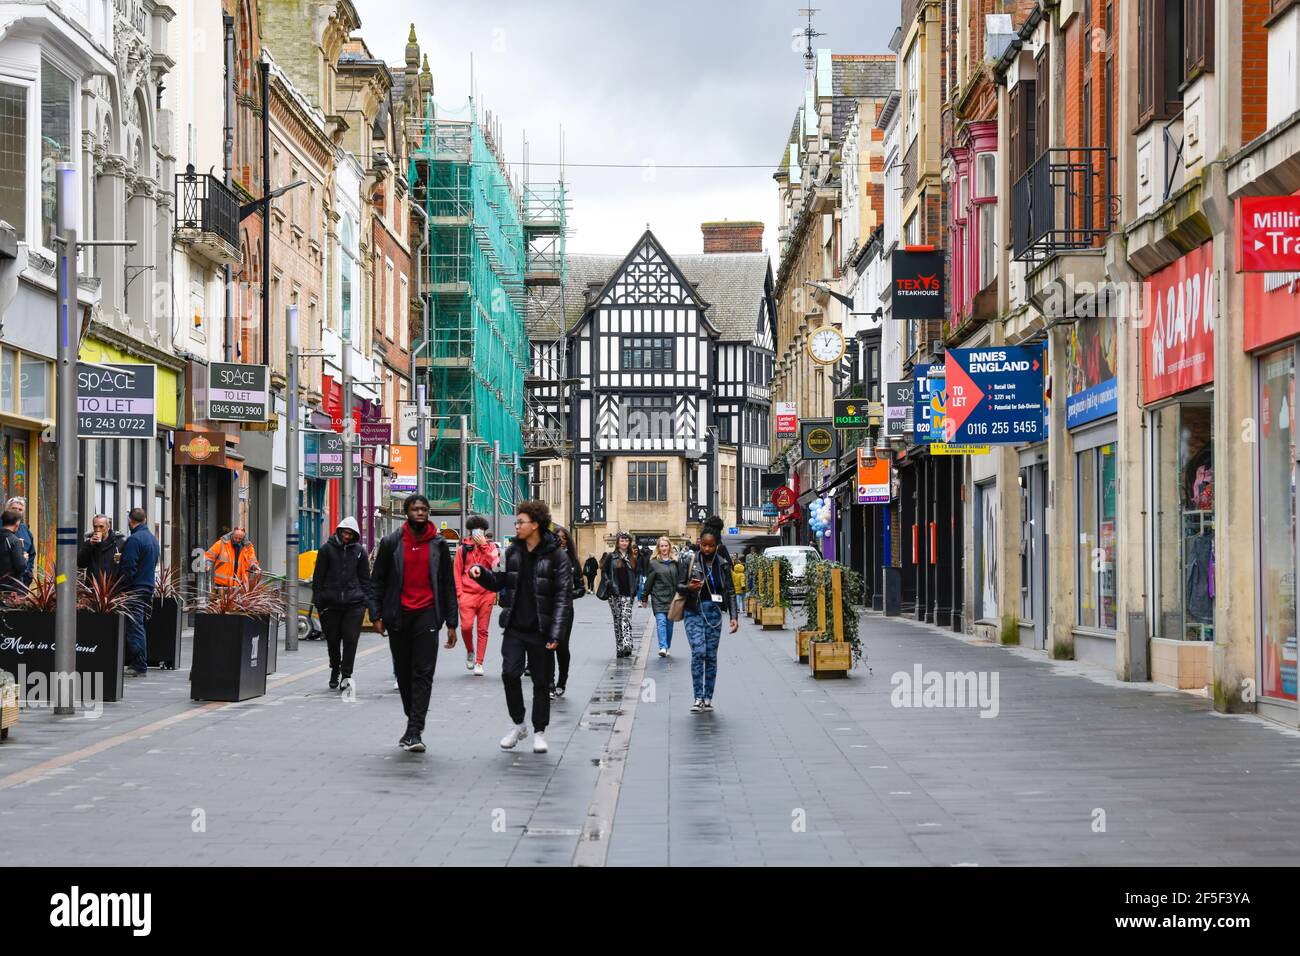 Leicester, UK. March 26 2021: . A busy day in Leicester as the city edges towards easing of lockdown. Credit: ANDRYPHOT/Alamy Live News Stock Photo